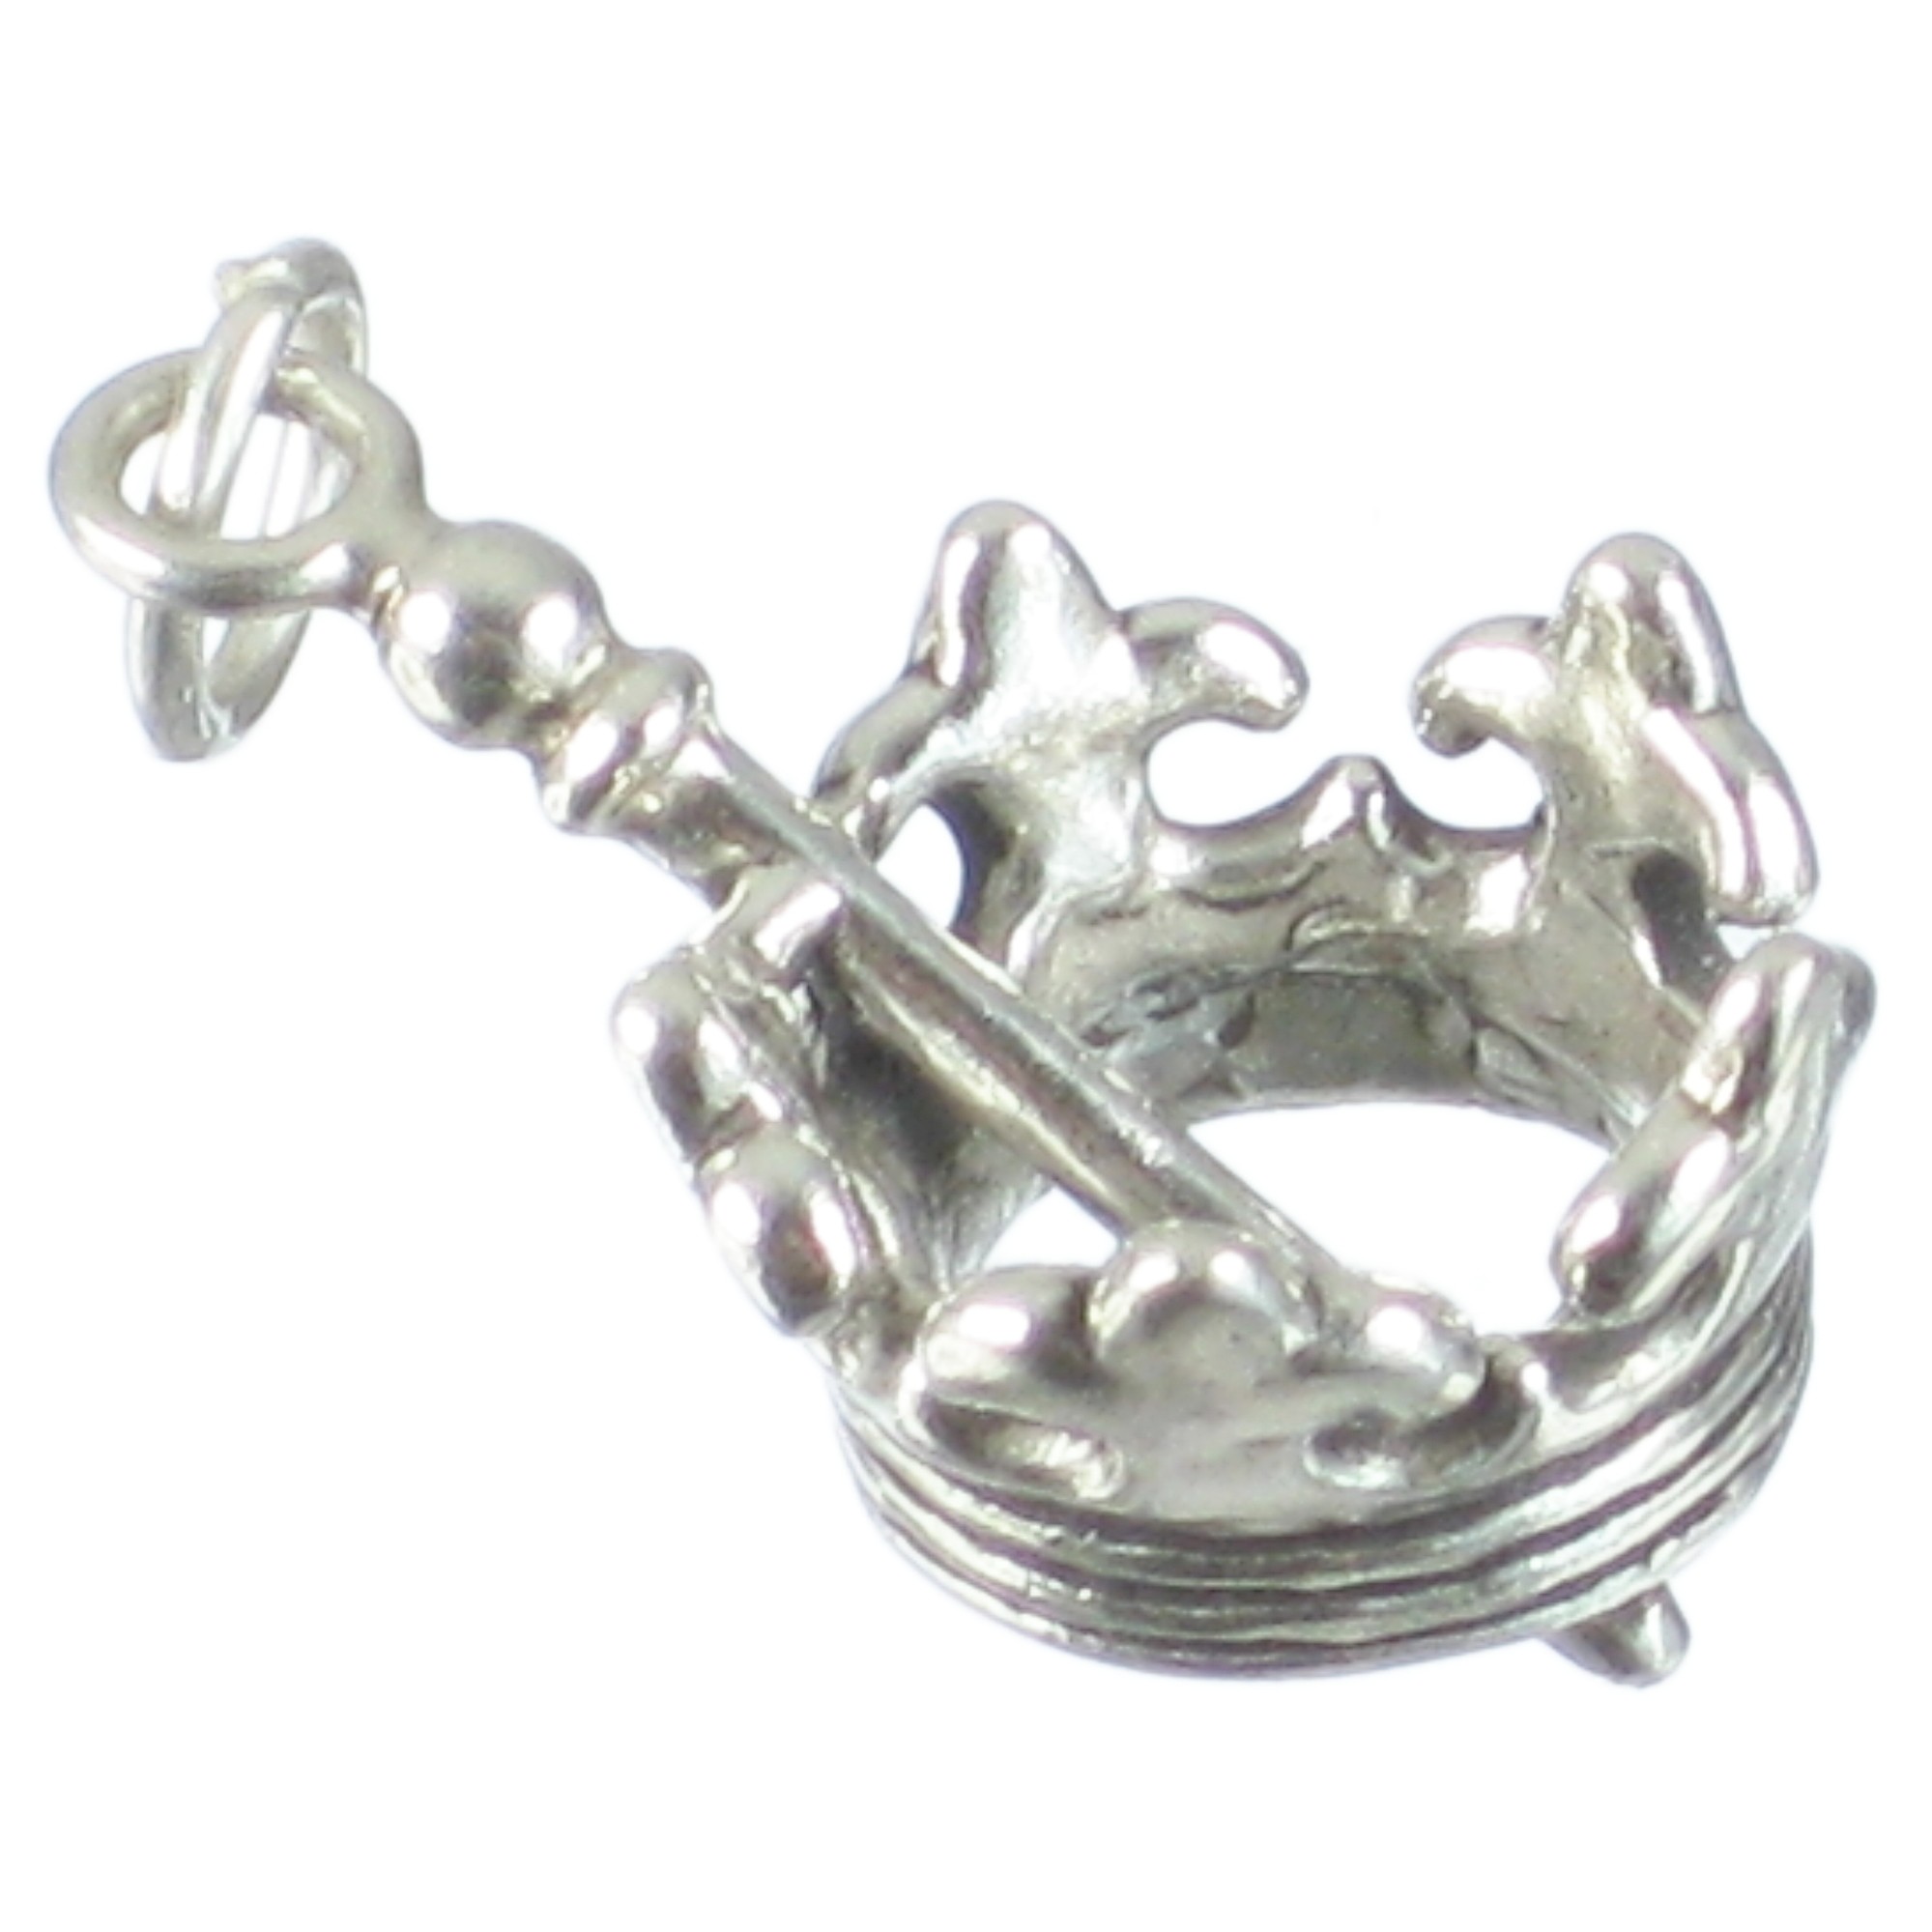 Crown and Sceptre sterling silver charm .925 x 1 Crowns Scepter charms